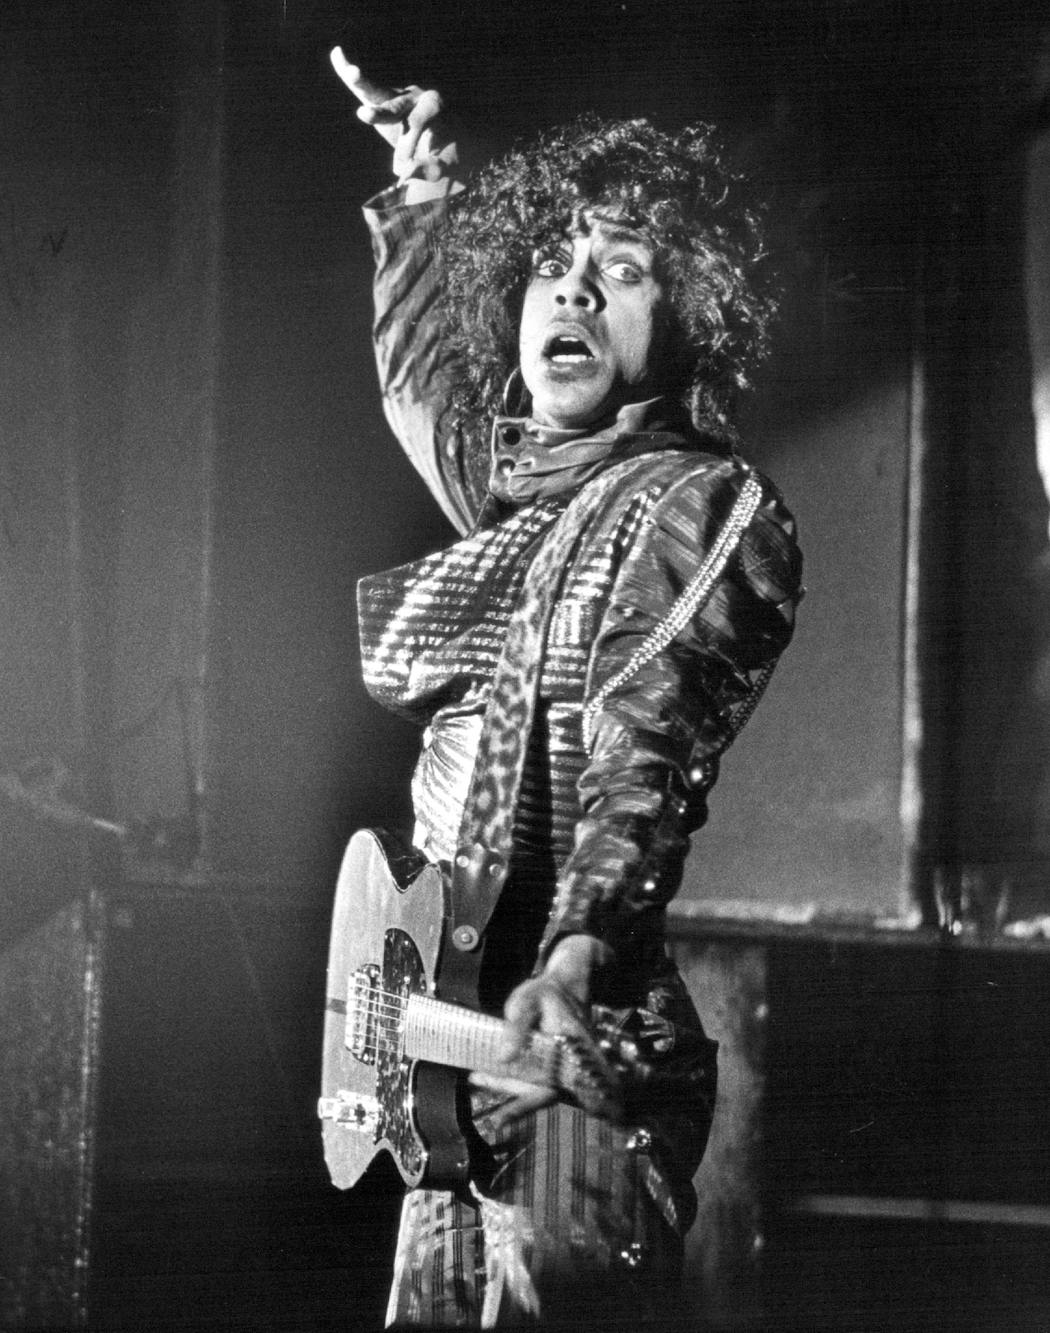 Prince performed at First Avenue in 1983.